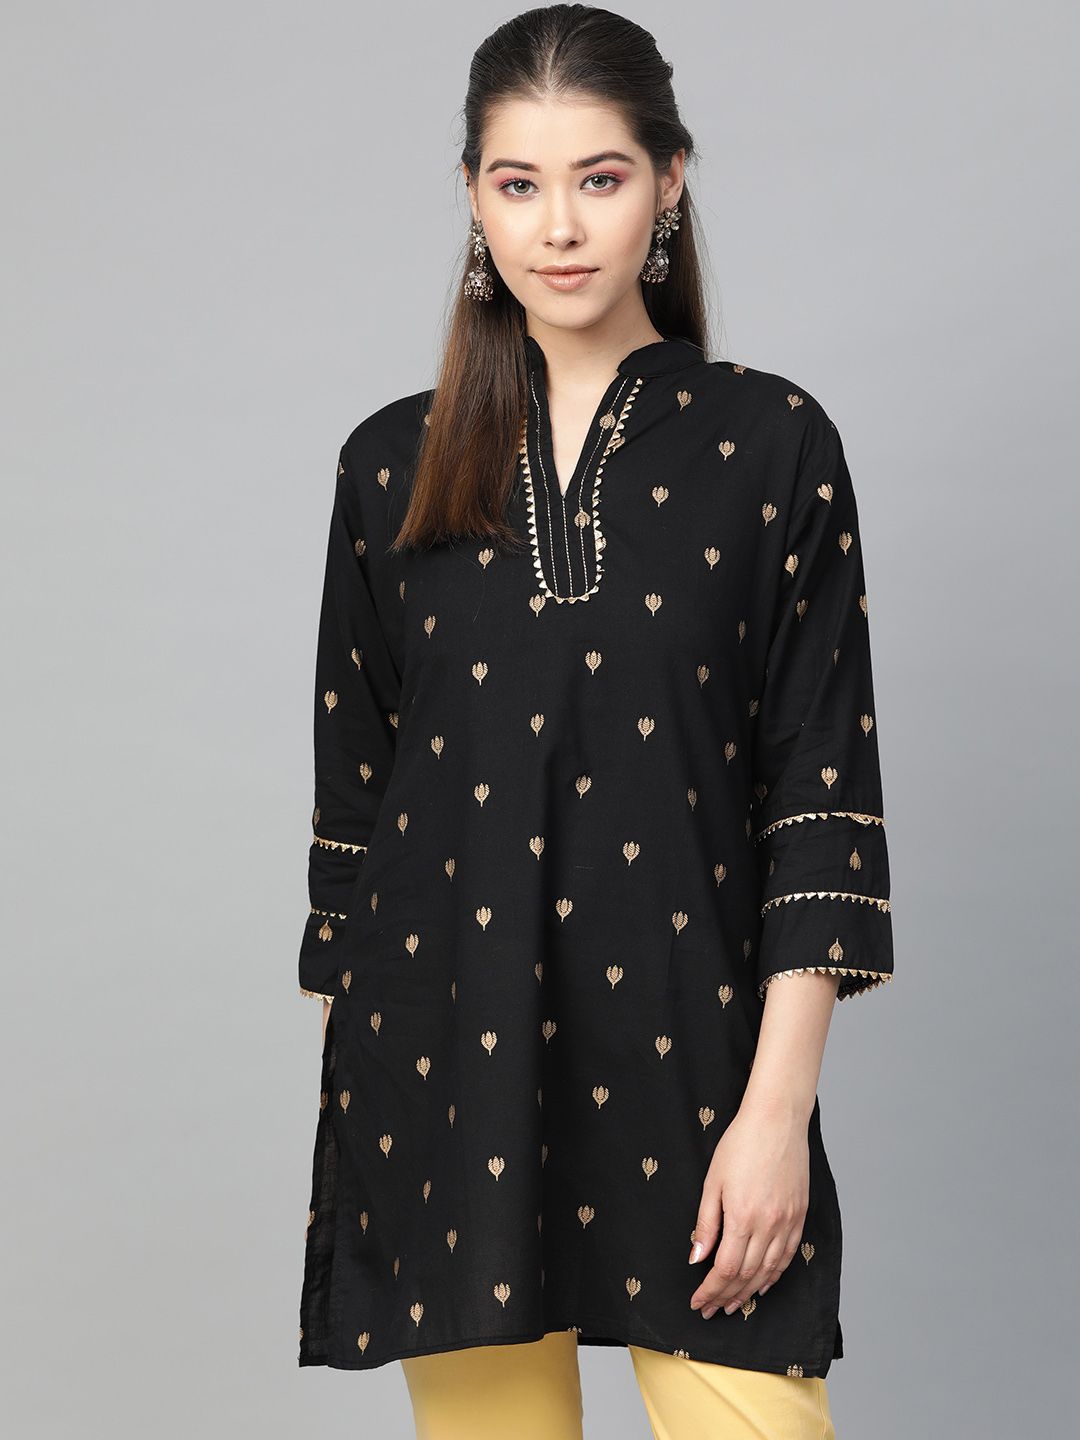 Bhama Couture Women Black & Golden Printed Tunic Price in India